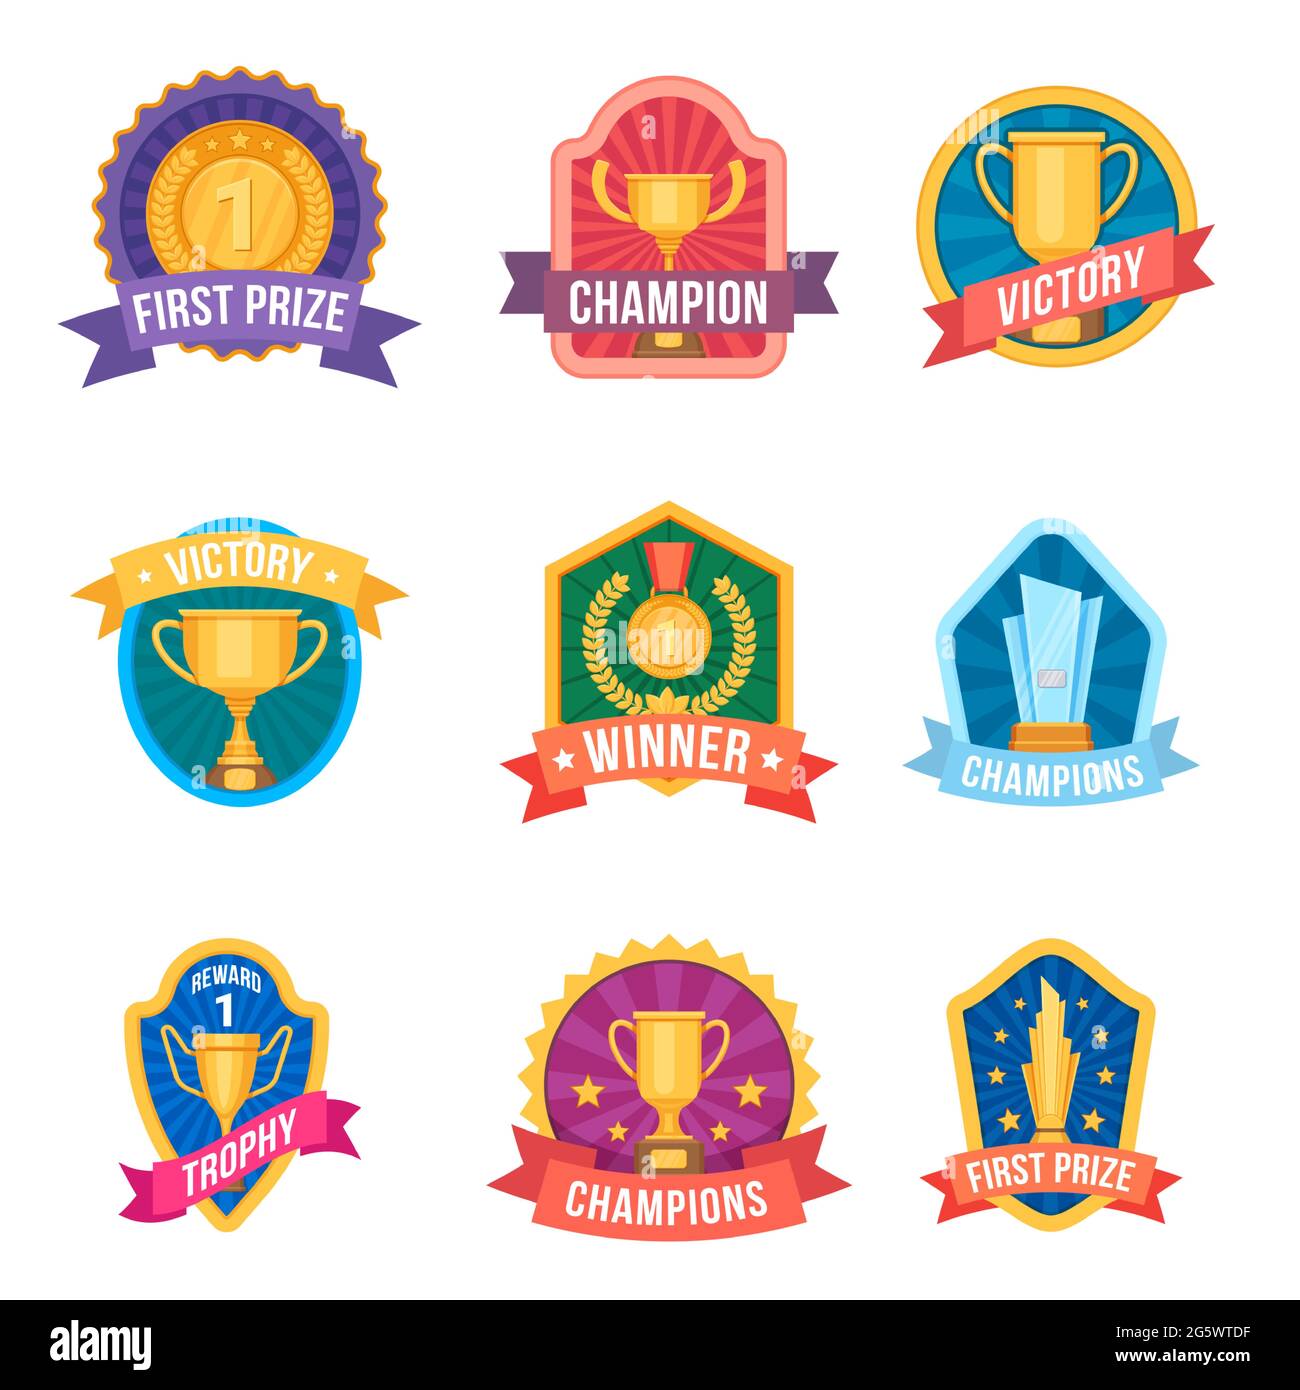 Champion emblems. Trophy cups and medals on award logos and sport league badges. Tournament victory. Cartoon winner first prize vector set Stock Vector